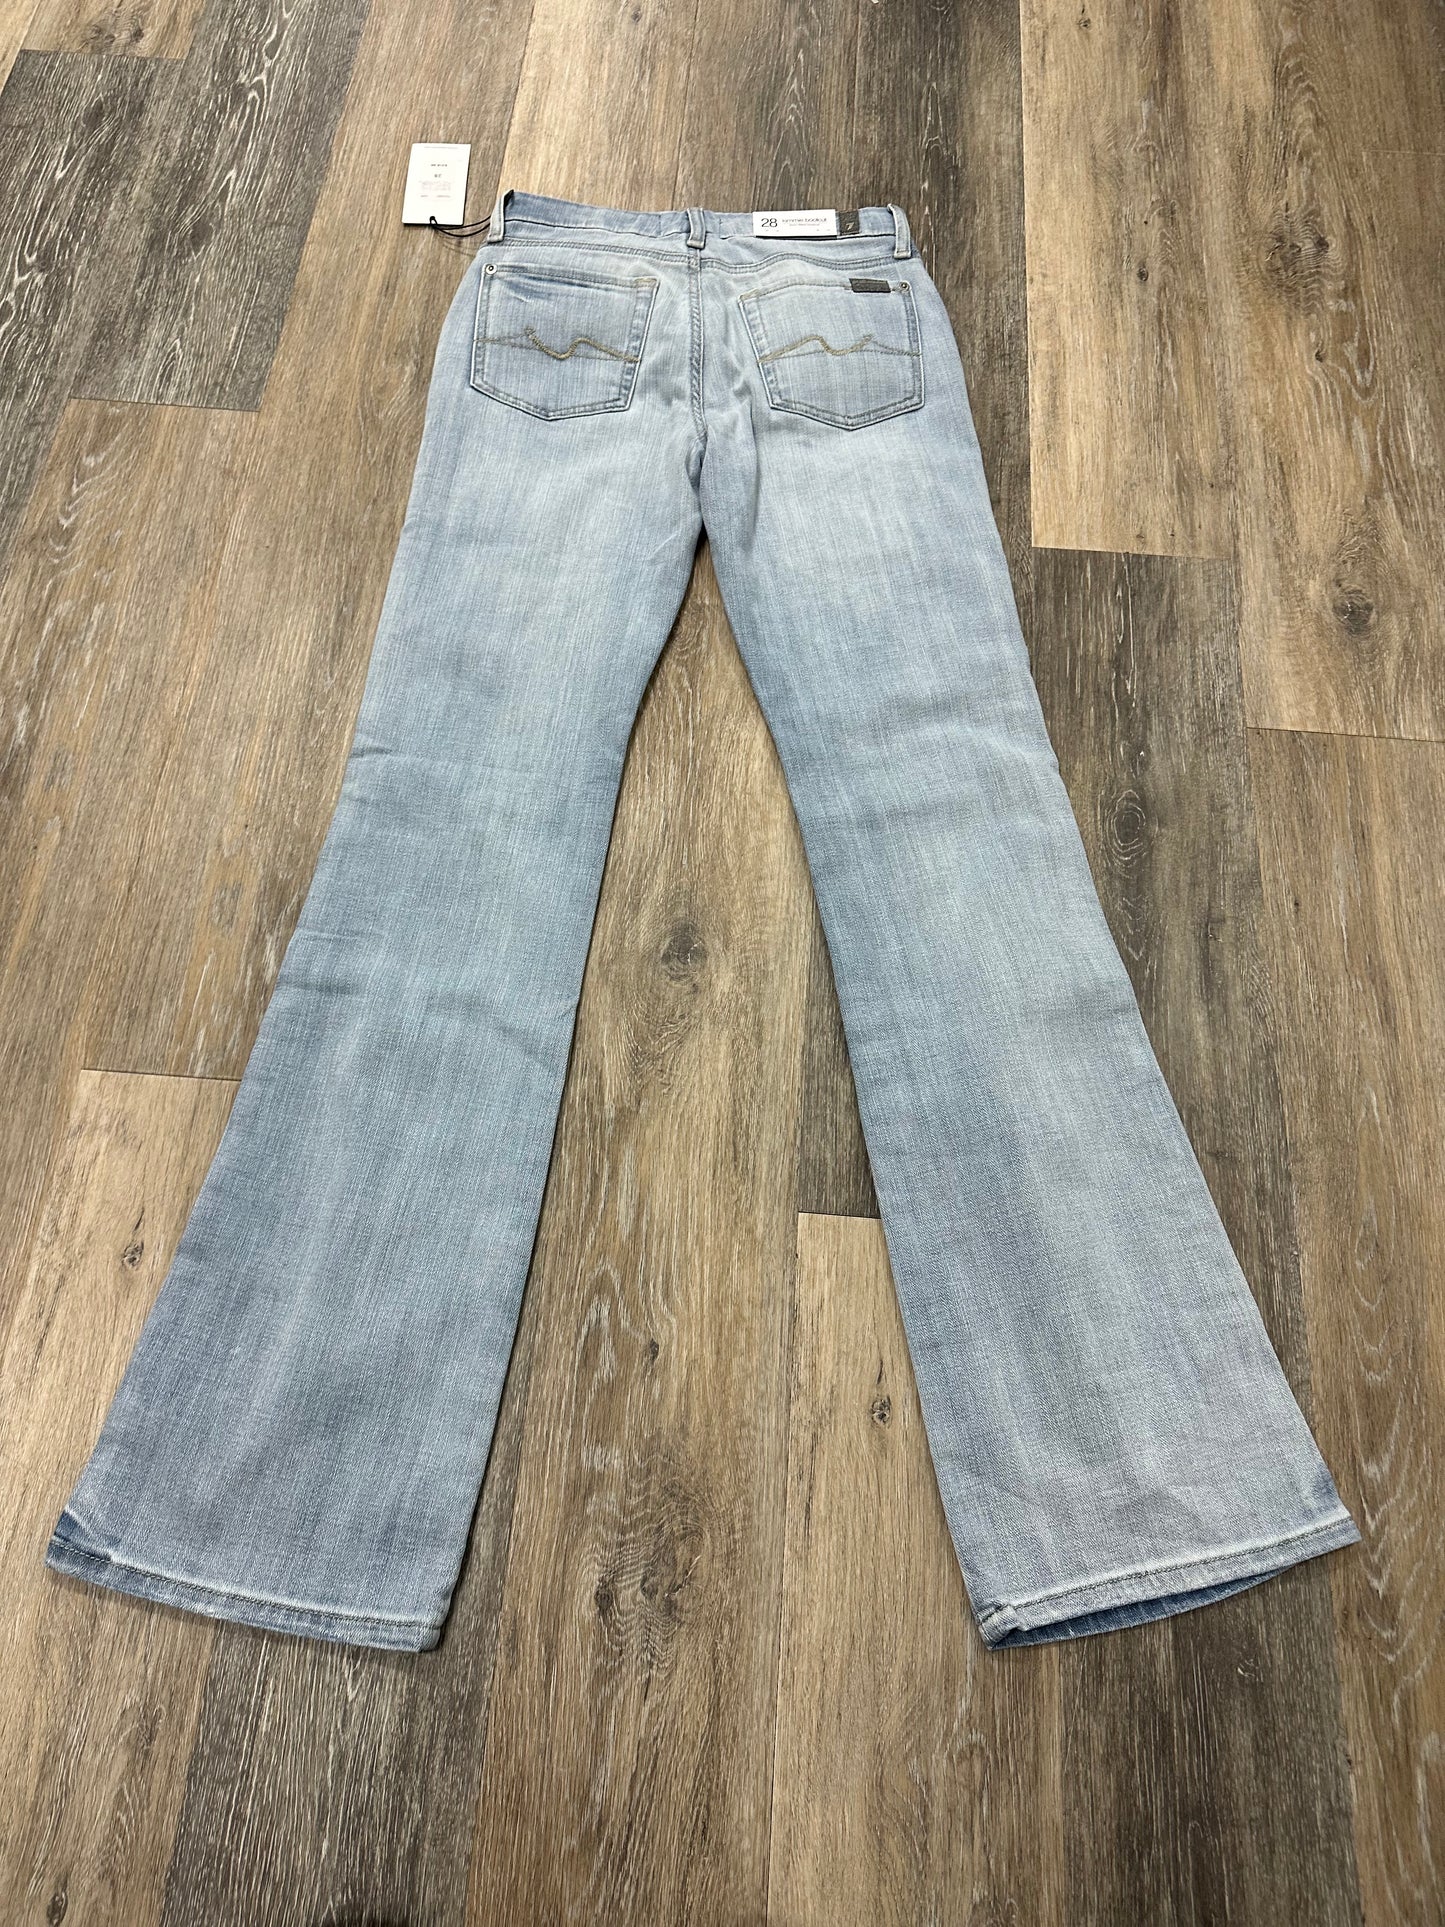 Jeans Designer By Seven For All Mankind  Size: 6